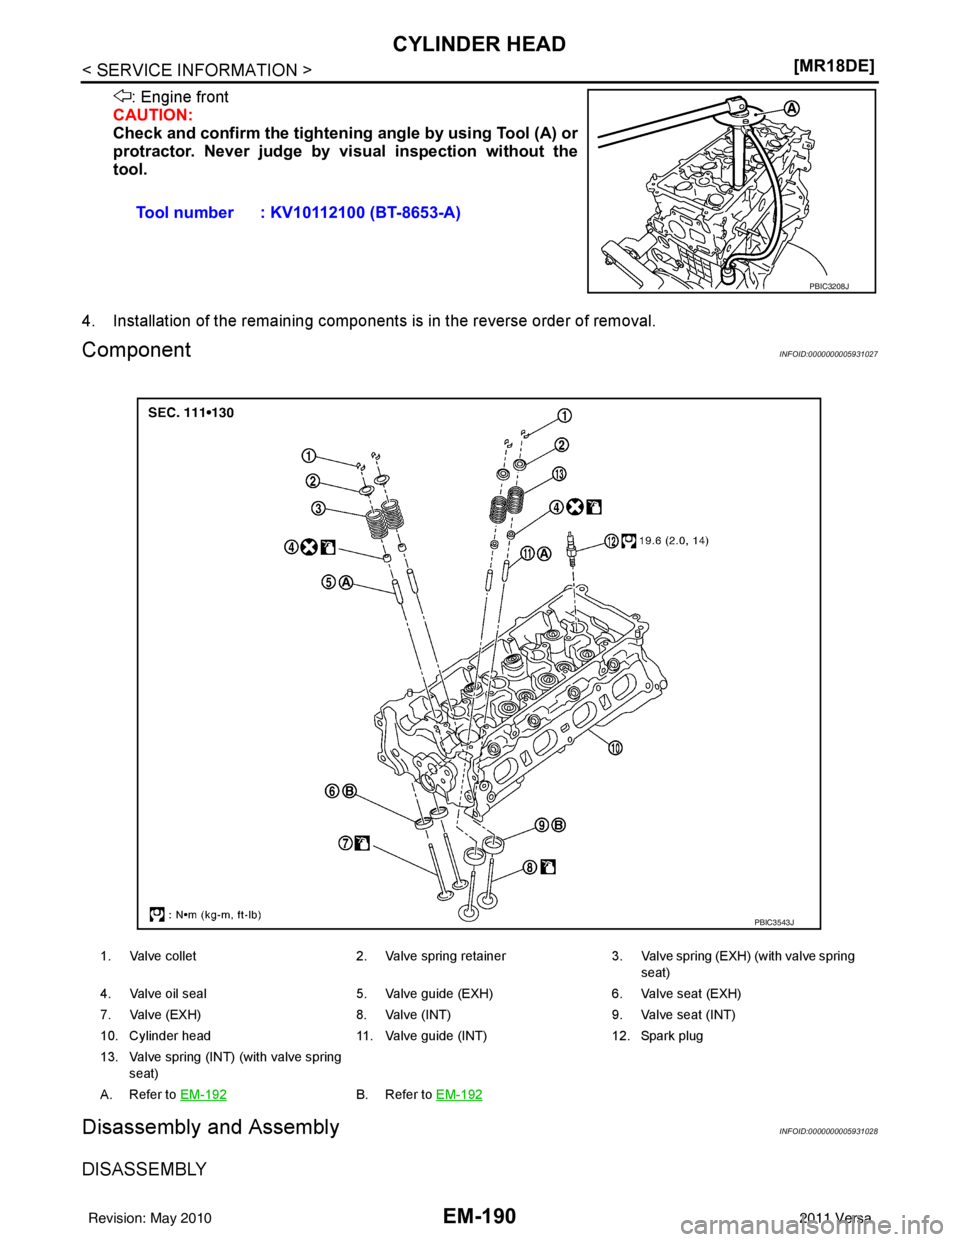 NISSAN LATIO 2011  Service Repair Manual EM-190
< SERVICE INFORMATION >[MR18DE]
CYLINDER HEAD
: Engine front
CAUTION:
Check and confirm the  tightening angle by using Tool (A) or
protractor. Never judge by vi sual inspection without the
tool